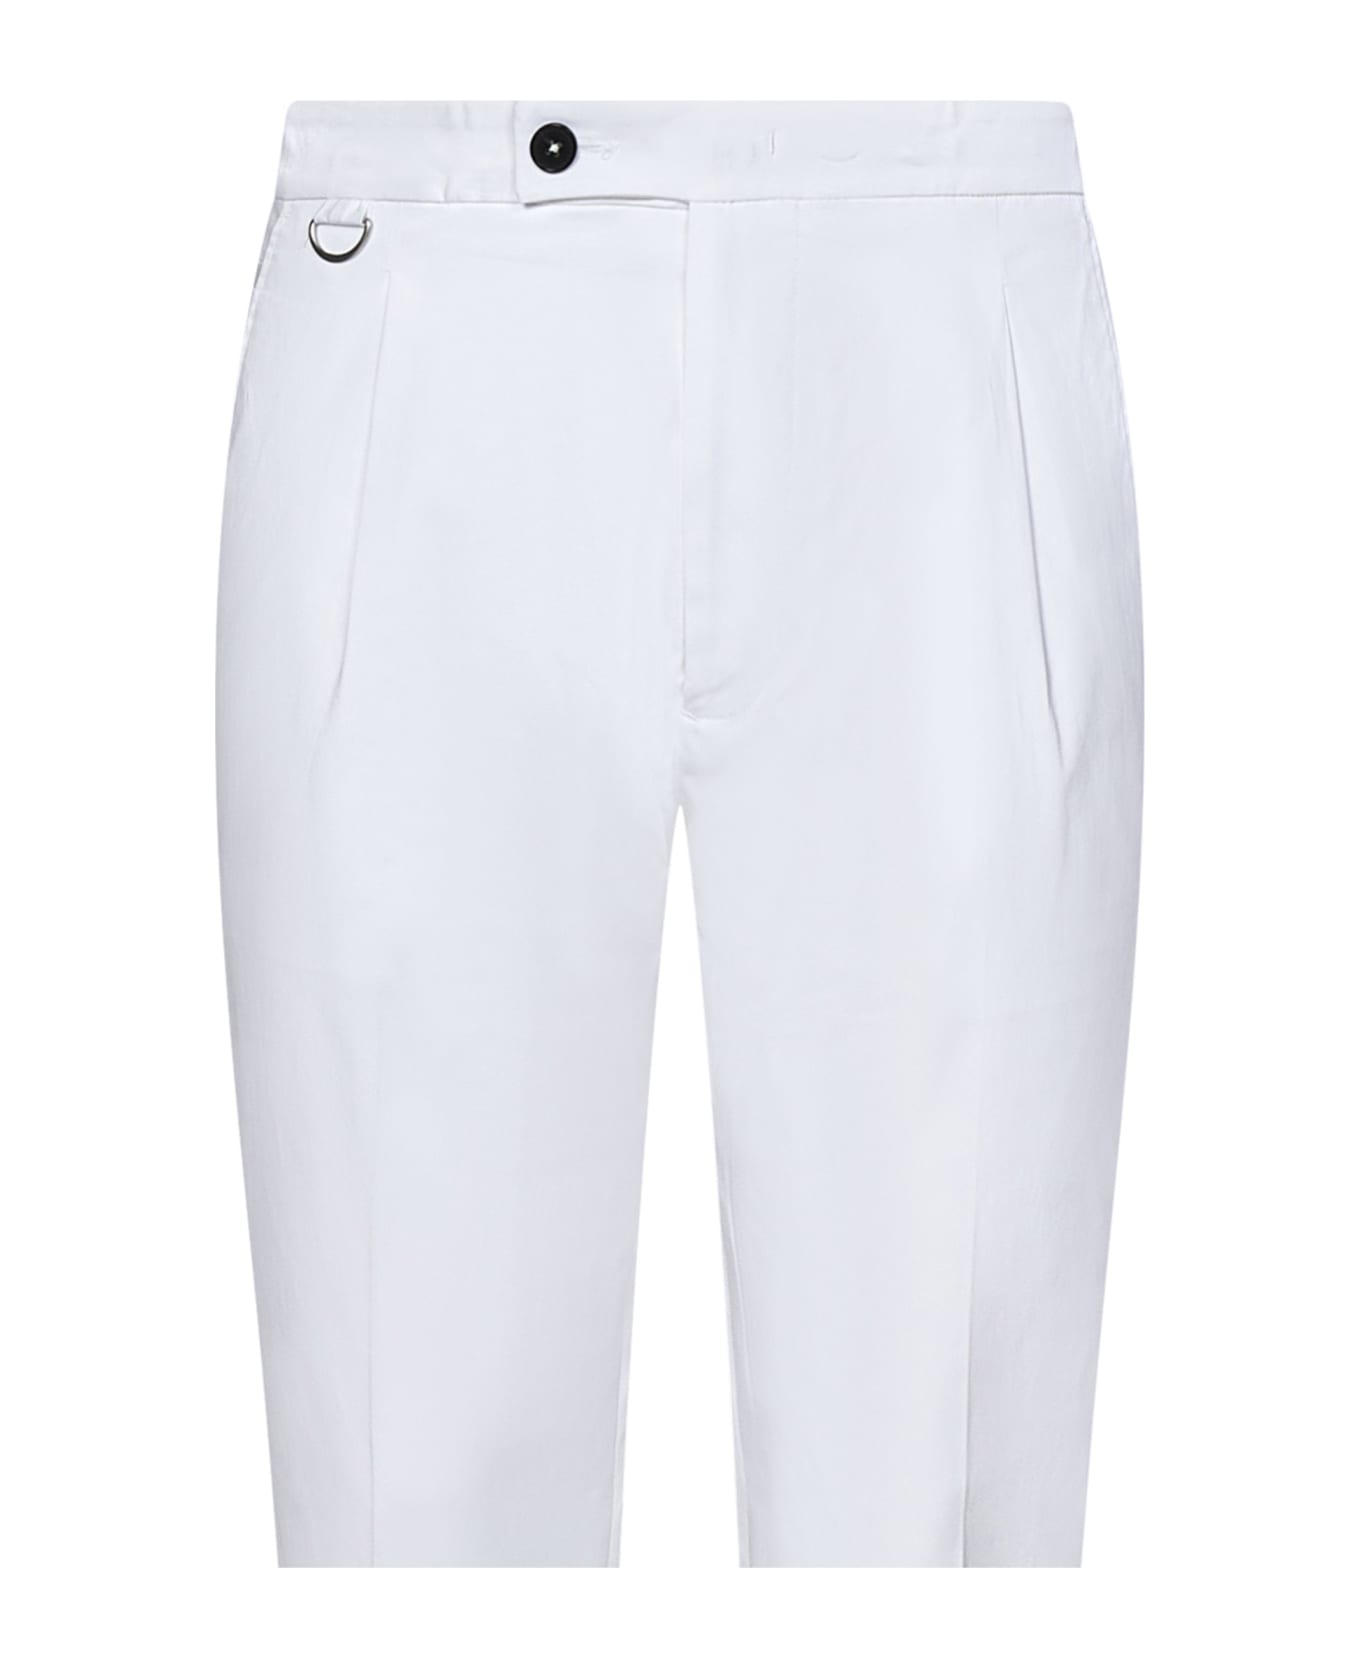 Low Brand Riviera Elastic Trousers - White